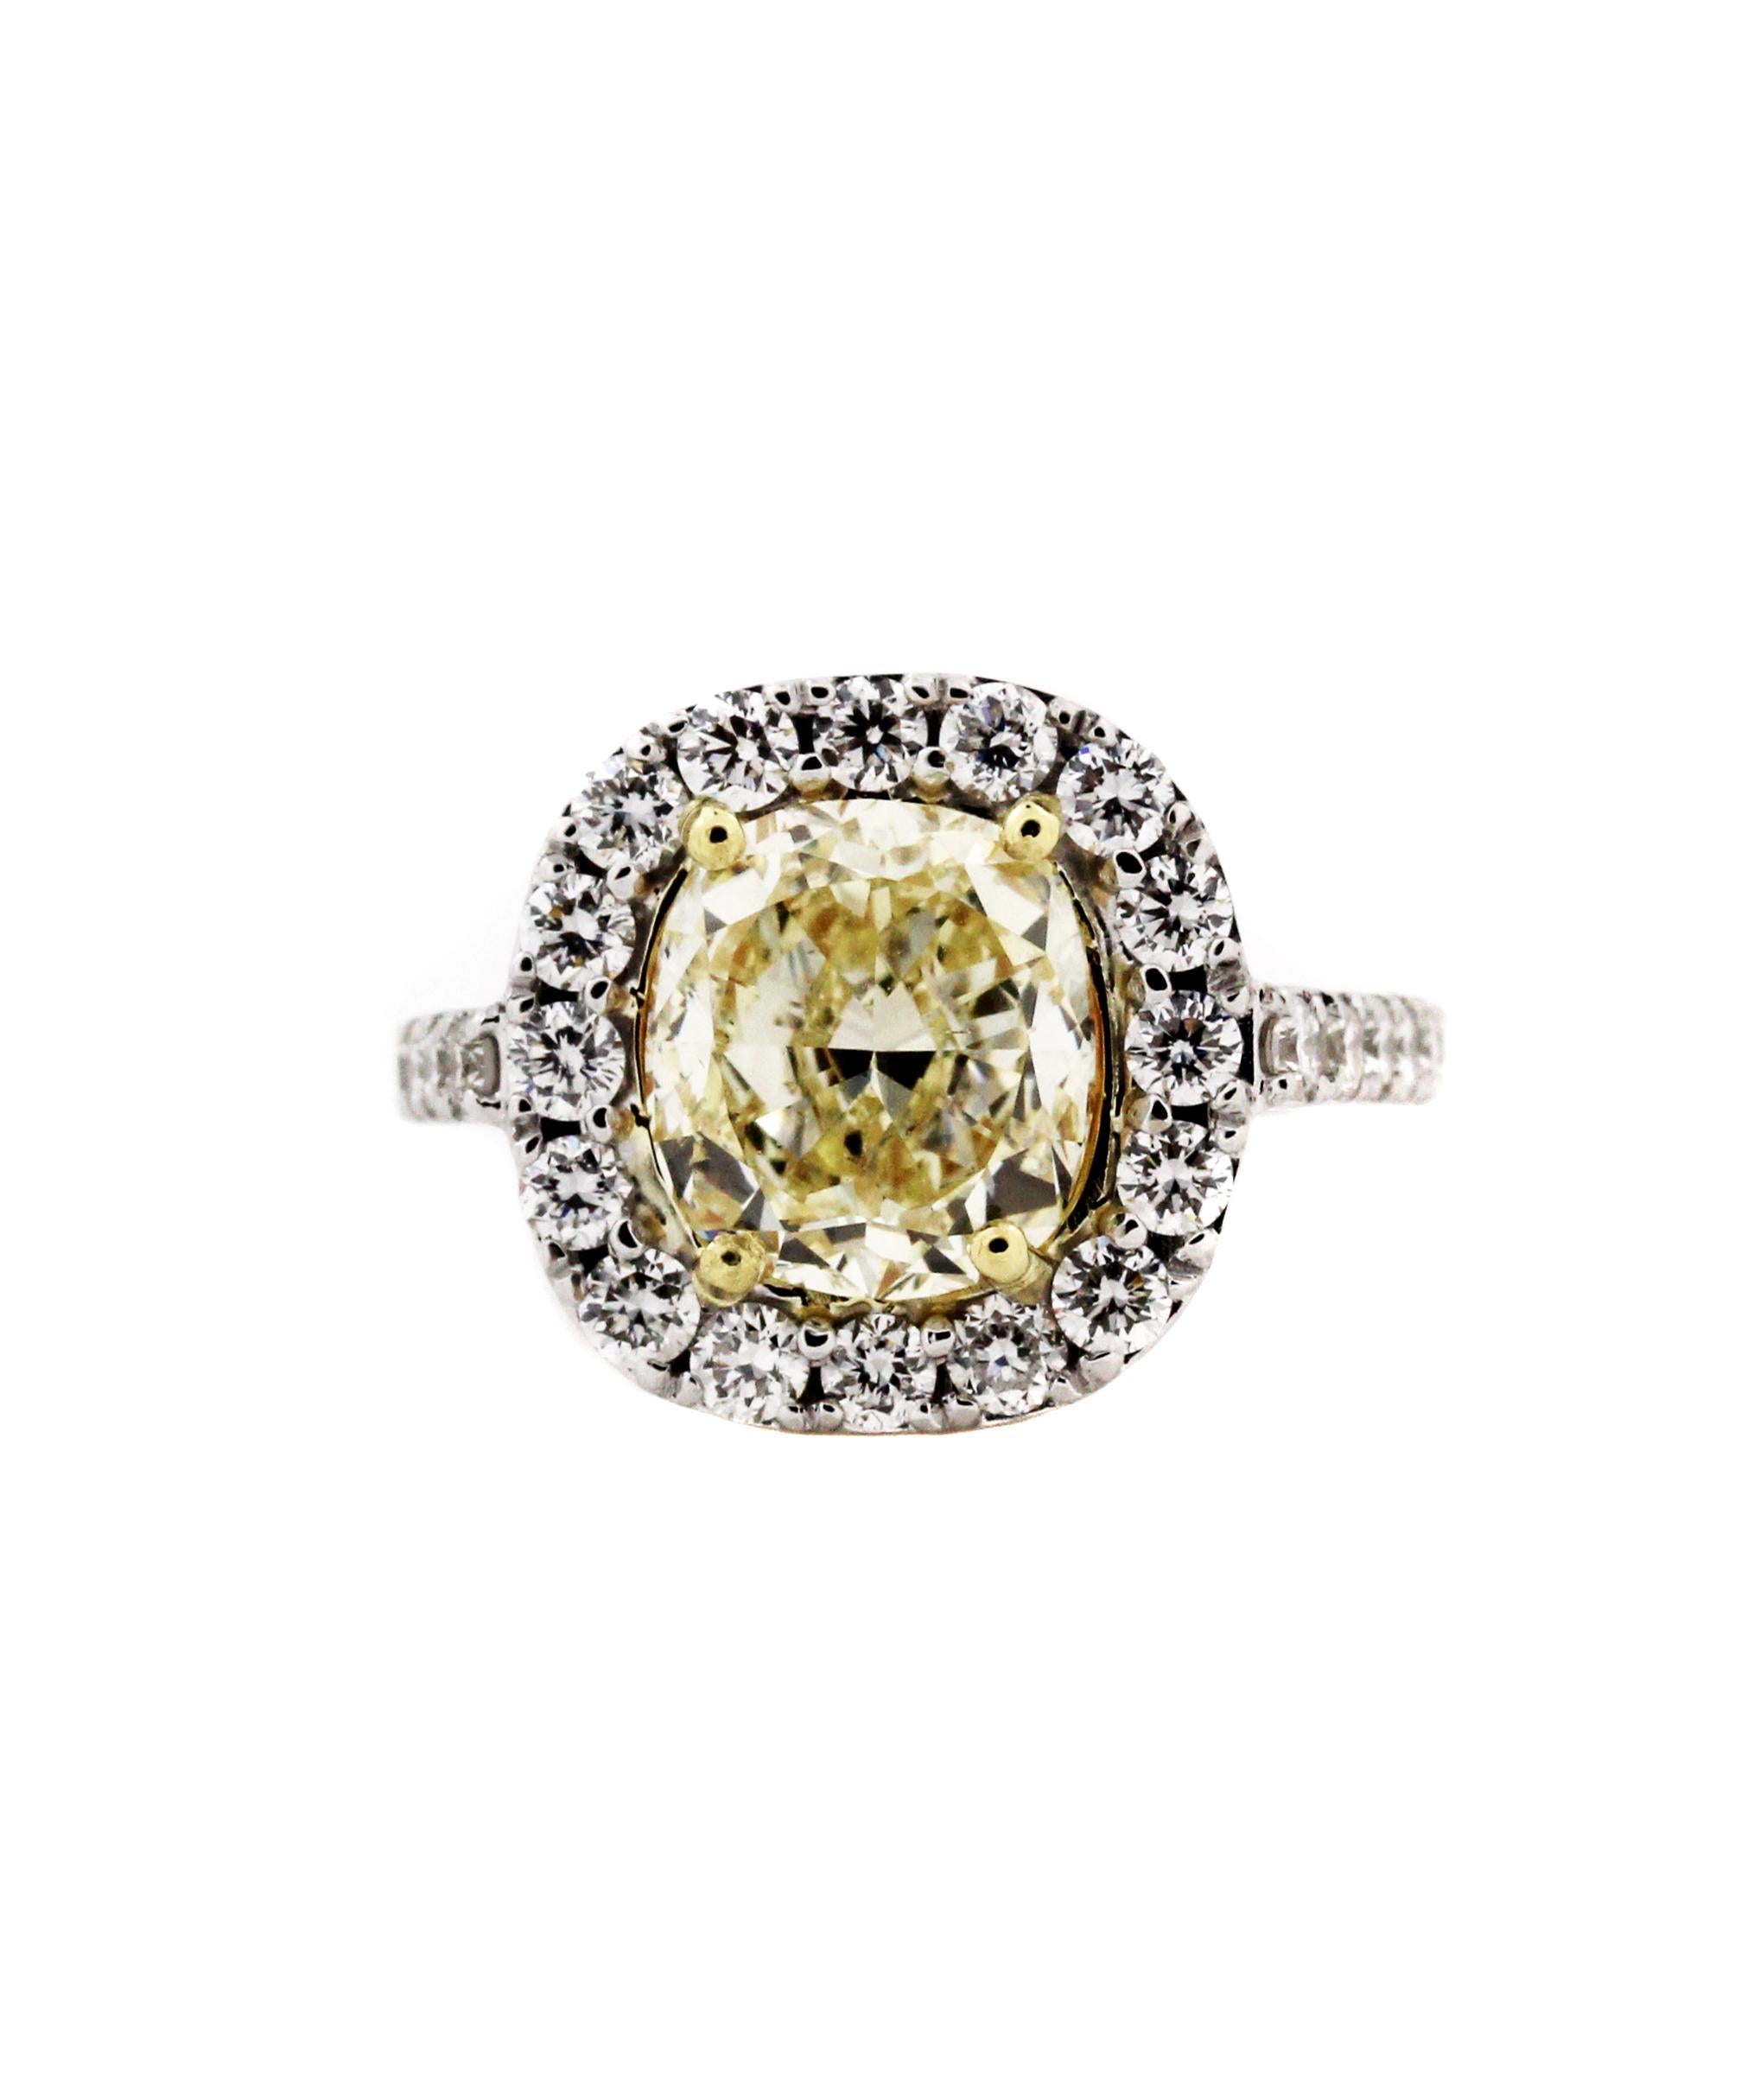 18K White Gold Ring with 3.12 carat Fancy Light Yellow Diamond 

Fancy Light Yellow Diamond, Cushion-cut, SI1, 3.12 carat

1.70 carat G color, VS clarity white diamonds all throughout ring

Size 6.5. Sizable